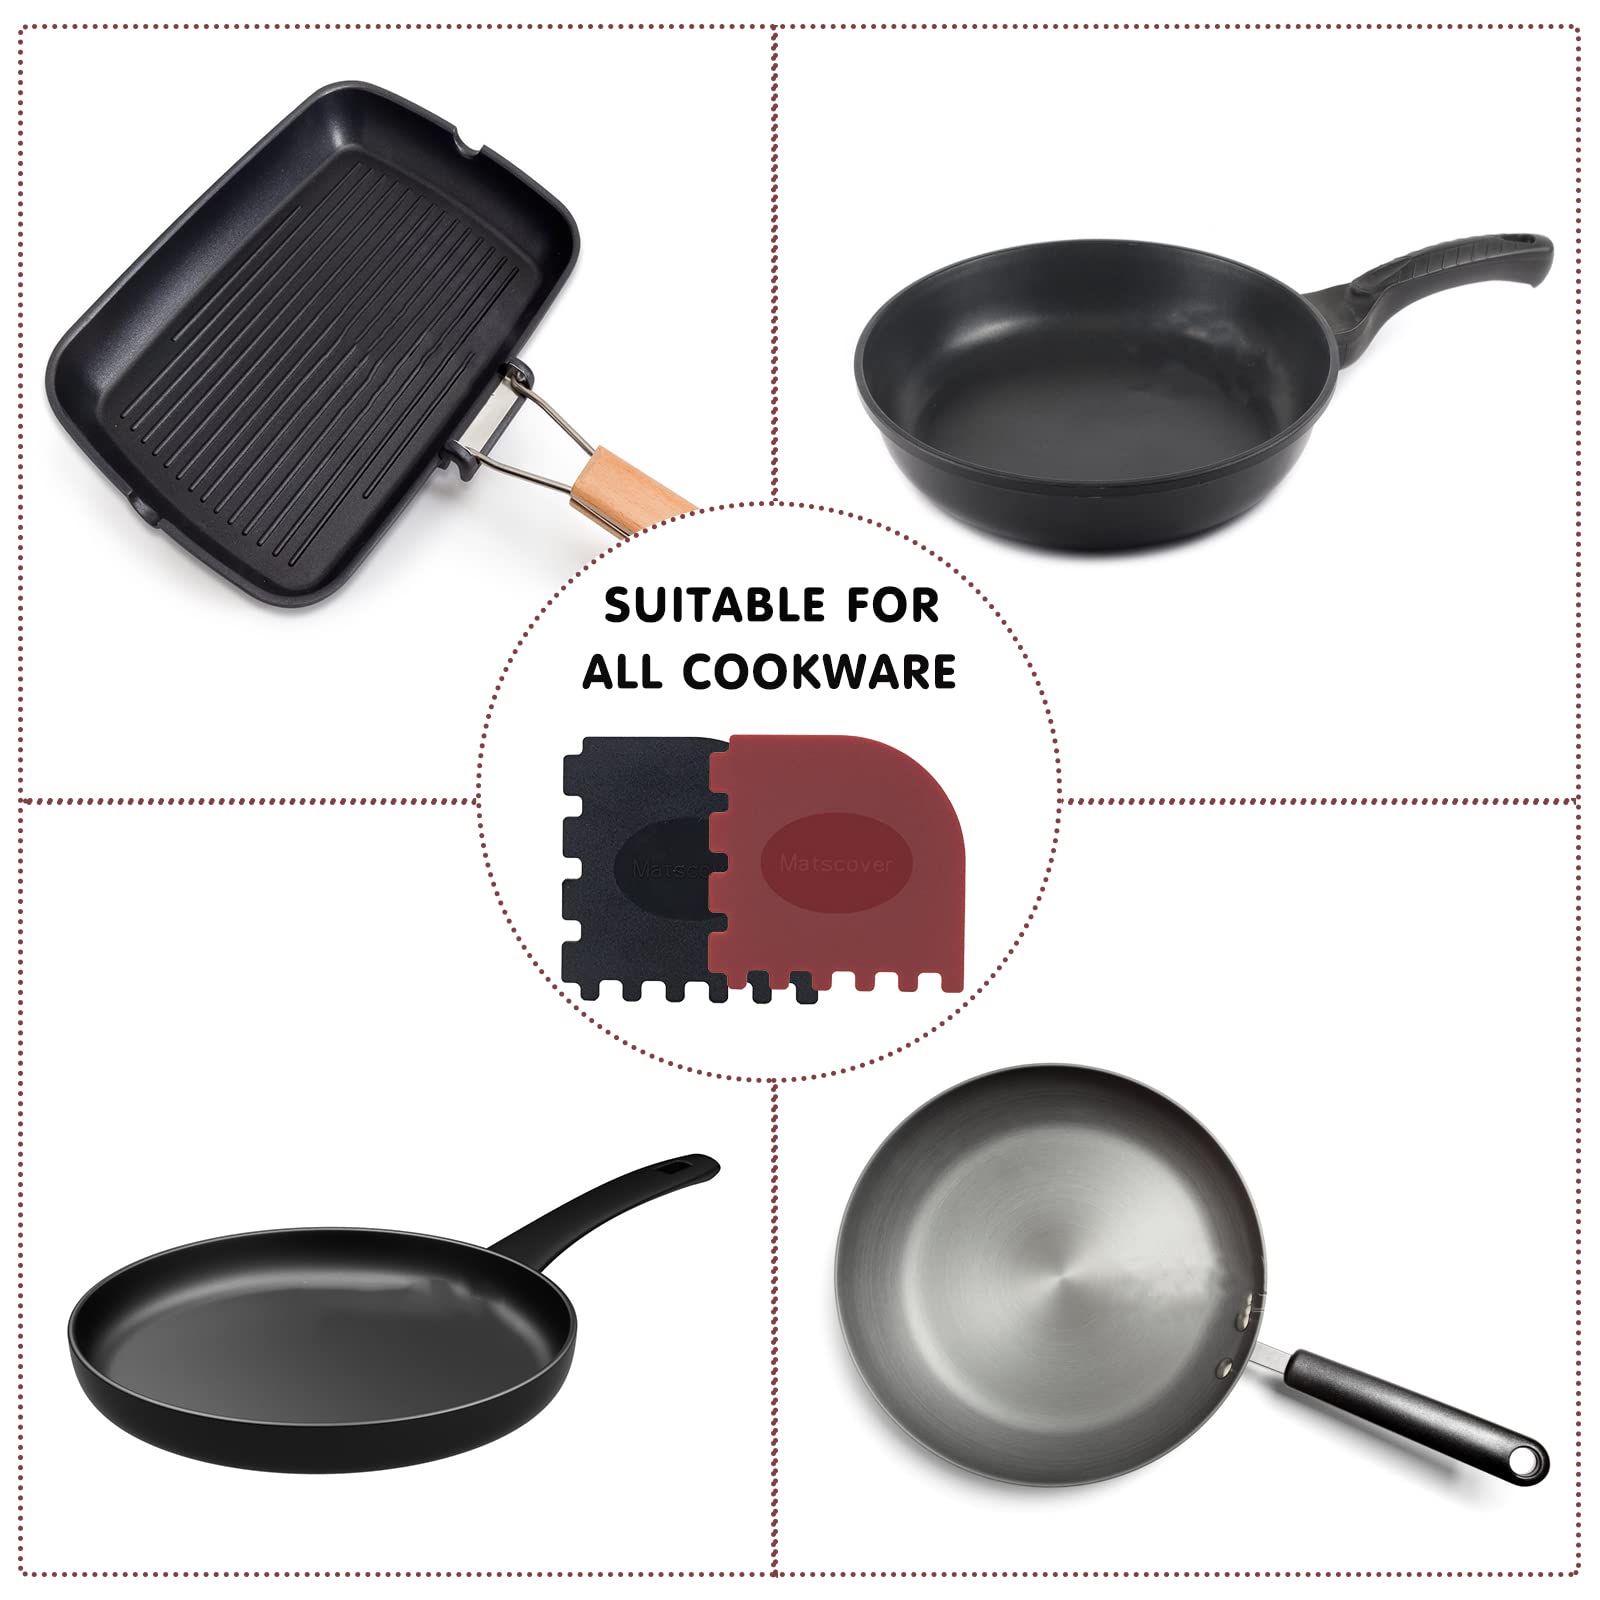 Matscover Grill Pan Scrapers, Cast Iron Scraper with Built-In Adsorption Gadget, Pot Scraper Non Scratch for Cast Iron Skillet, Frying Pans and Griddles Cleaning, Red and Black, 4 Pack